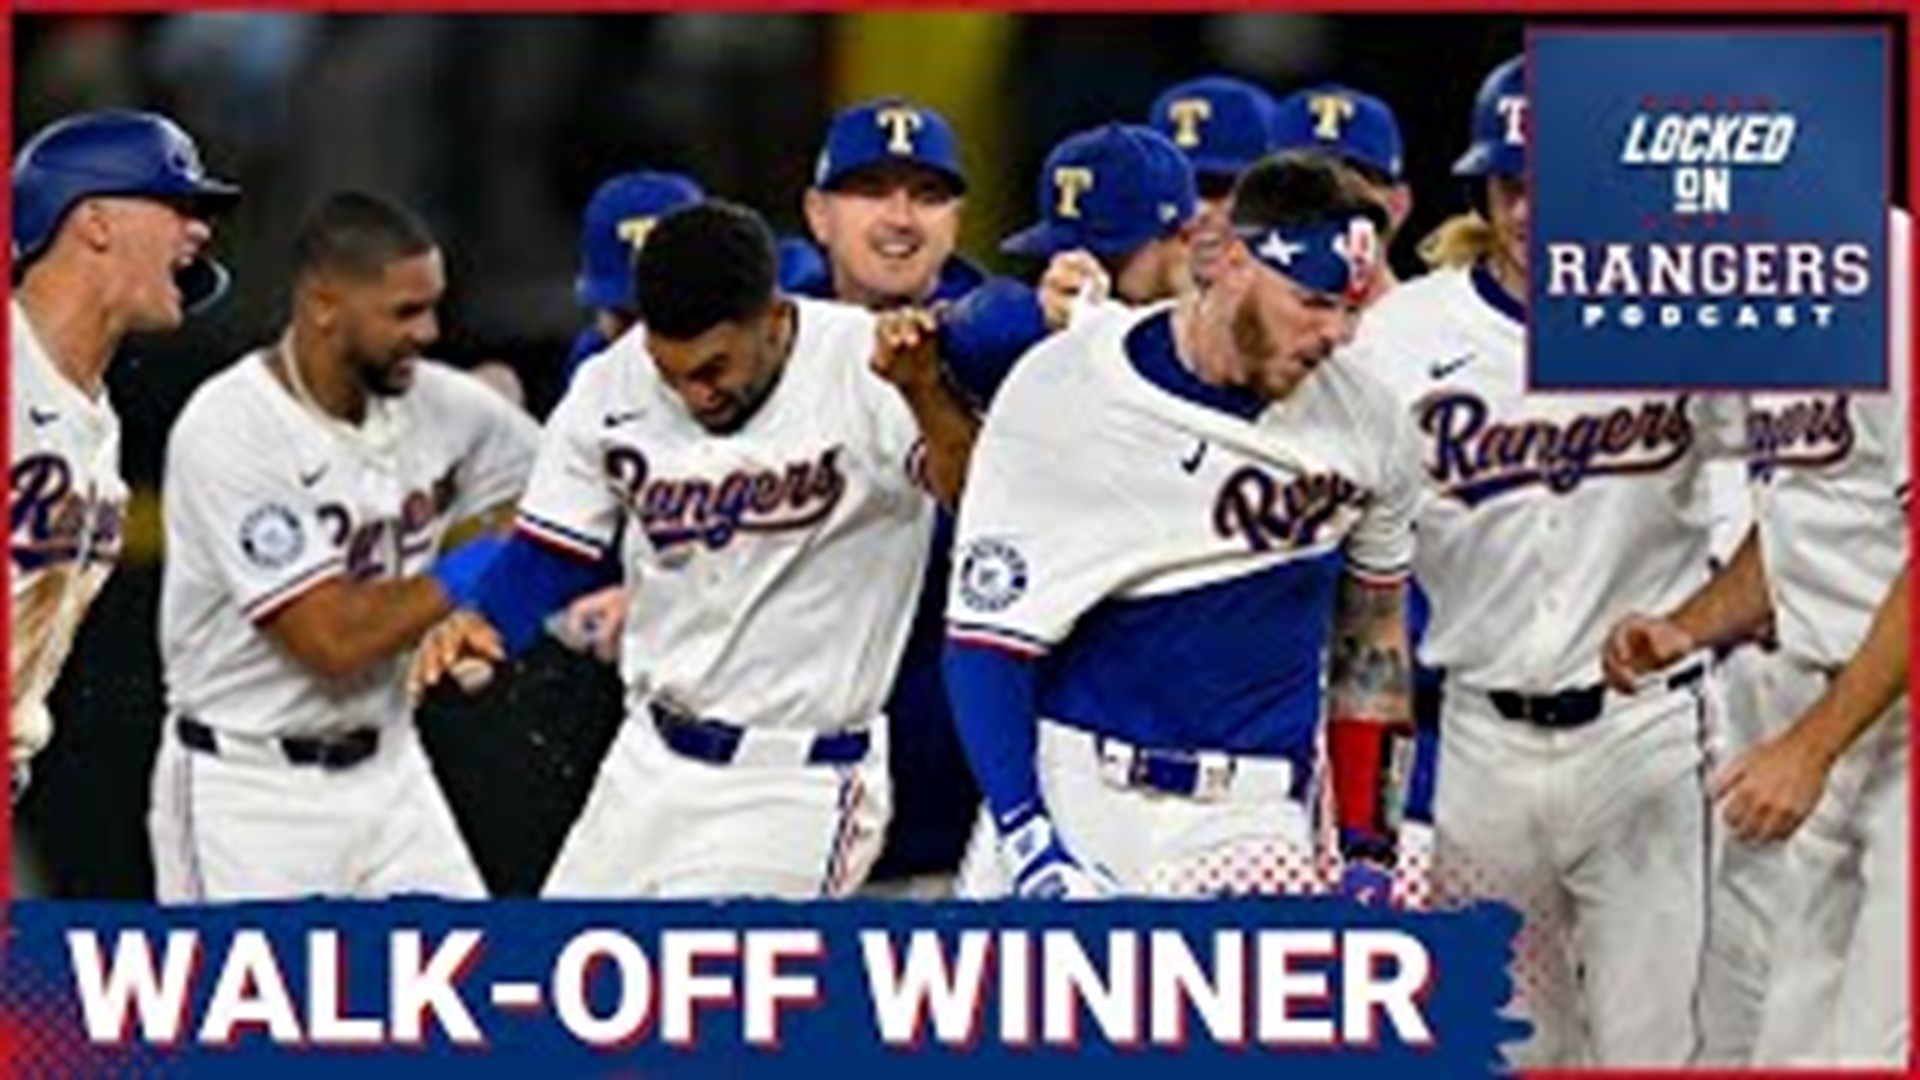 The Texas Rangers won their first game of the season in walk-off fashion thanks to Jonah Heim. Nathan Eovaldi showed up big in another big game.